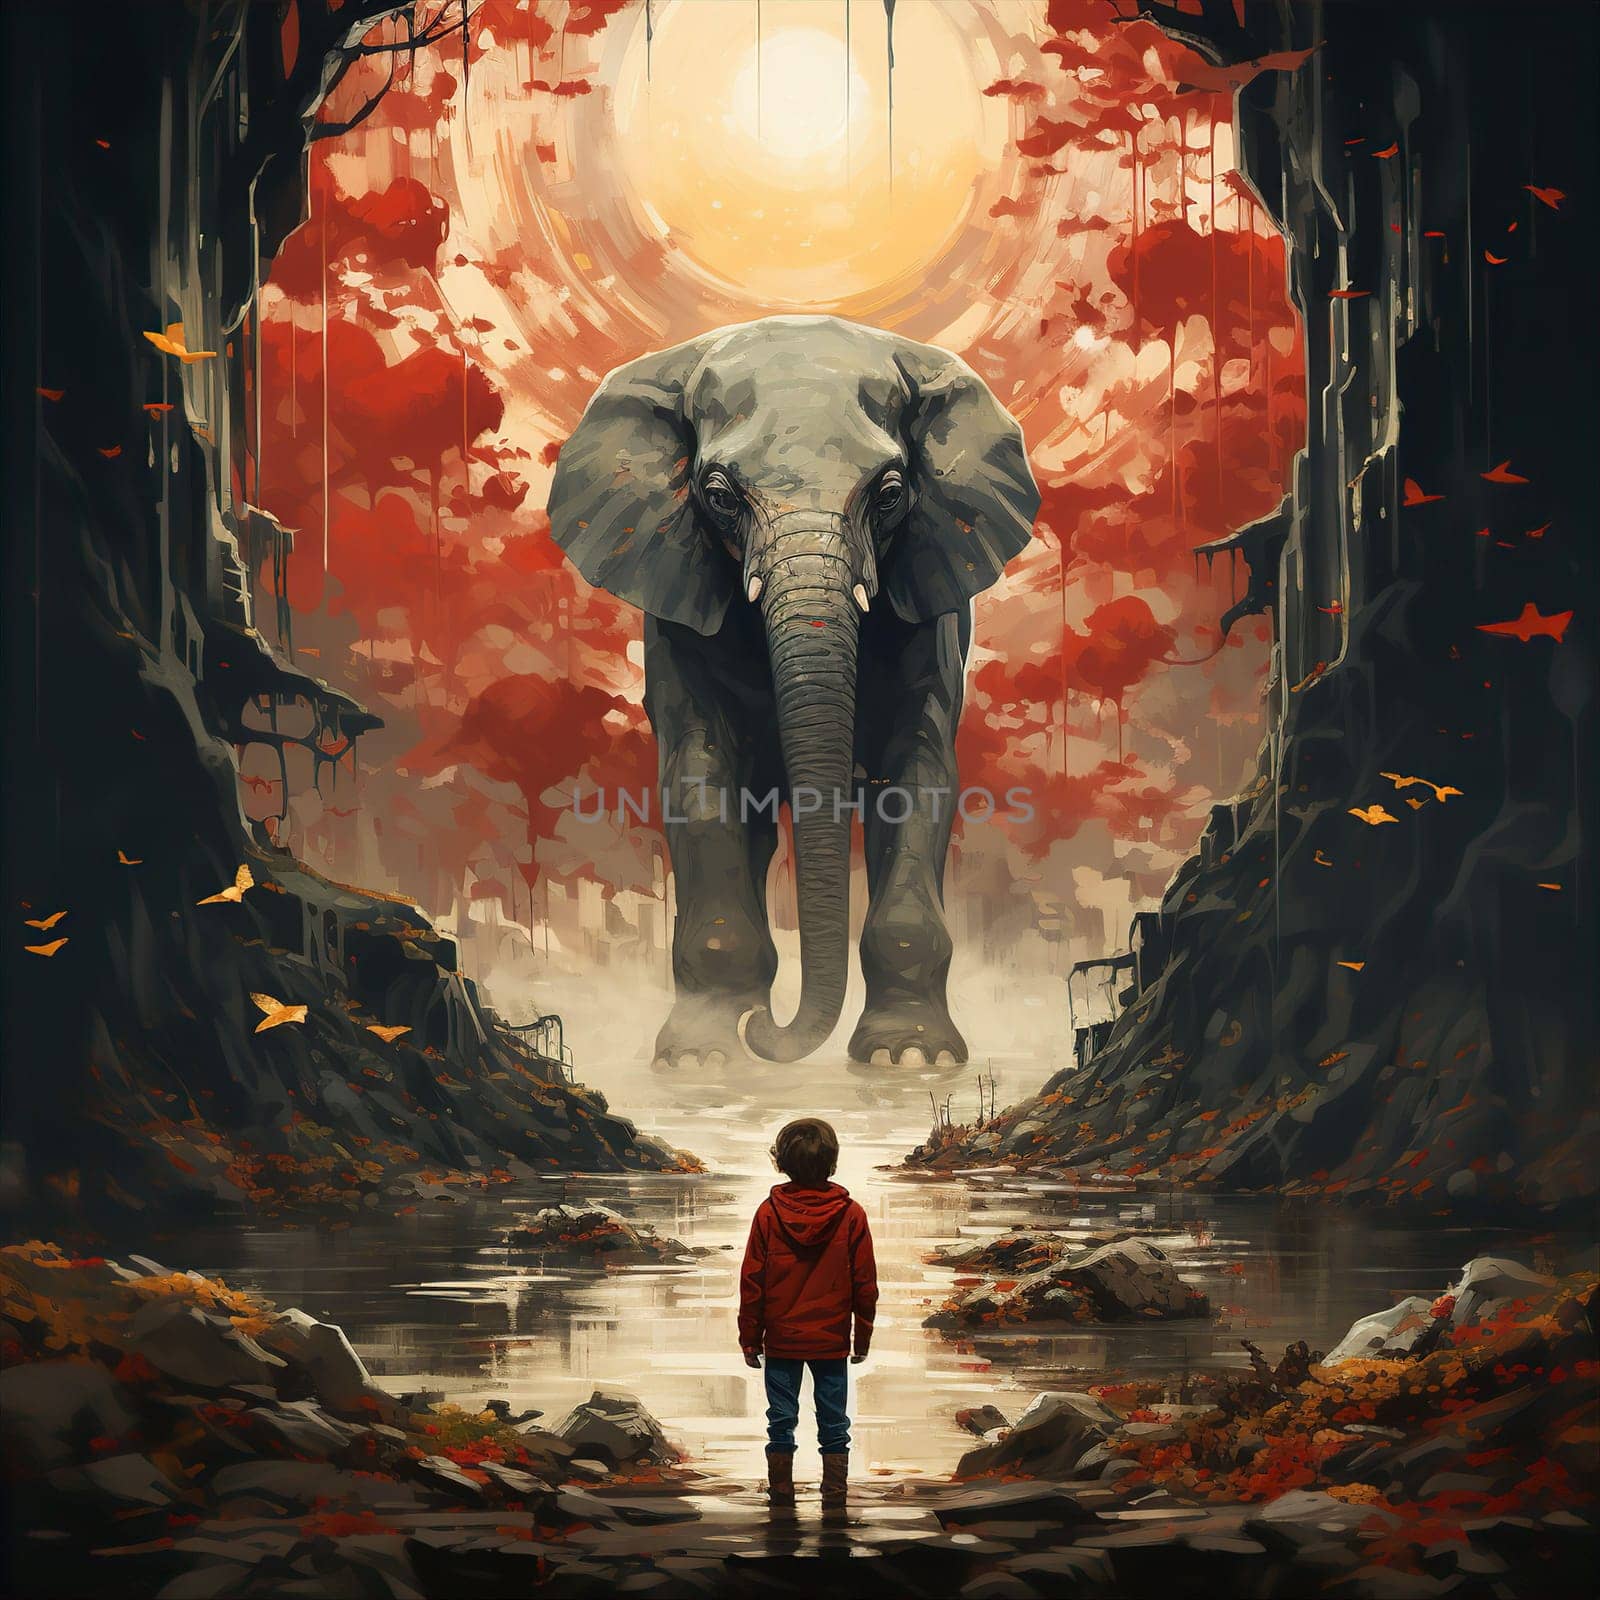 Small child standing in front of large elephant in mountains and water by kuprevich